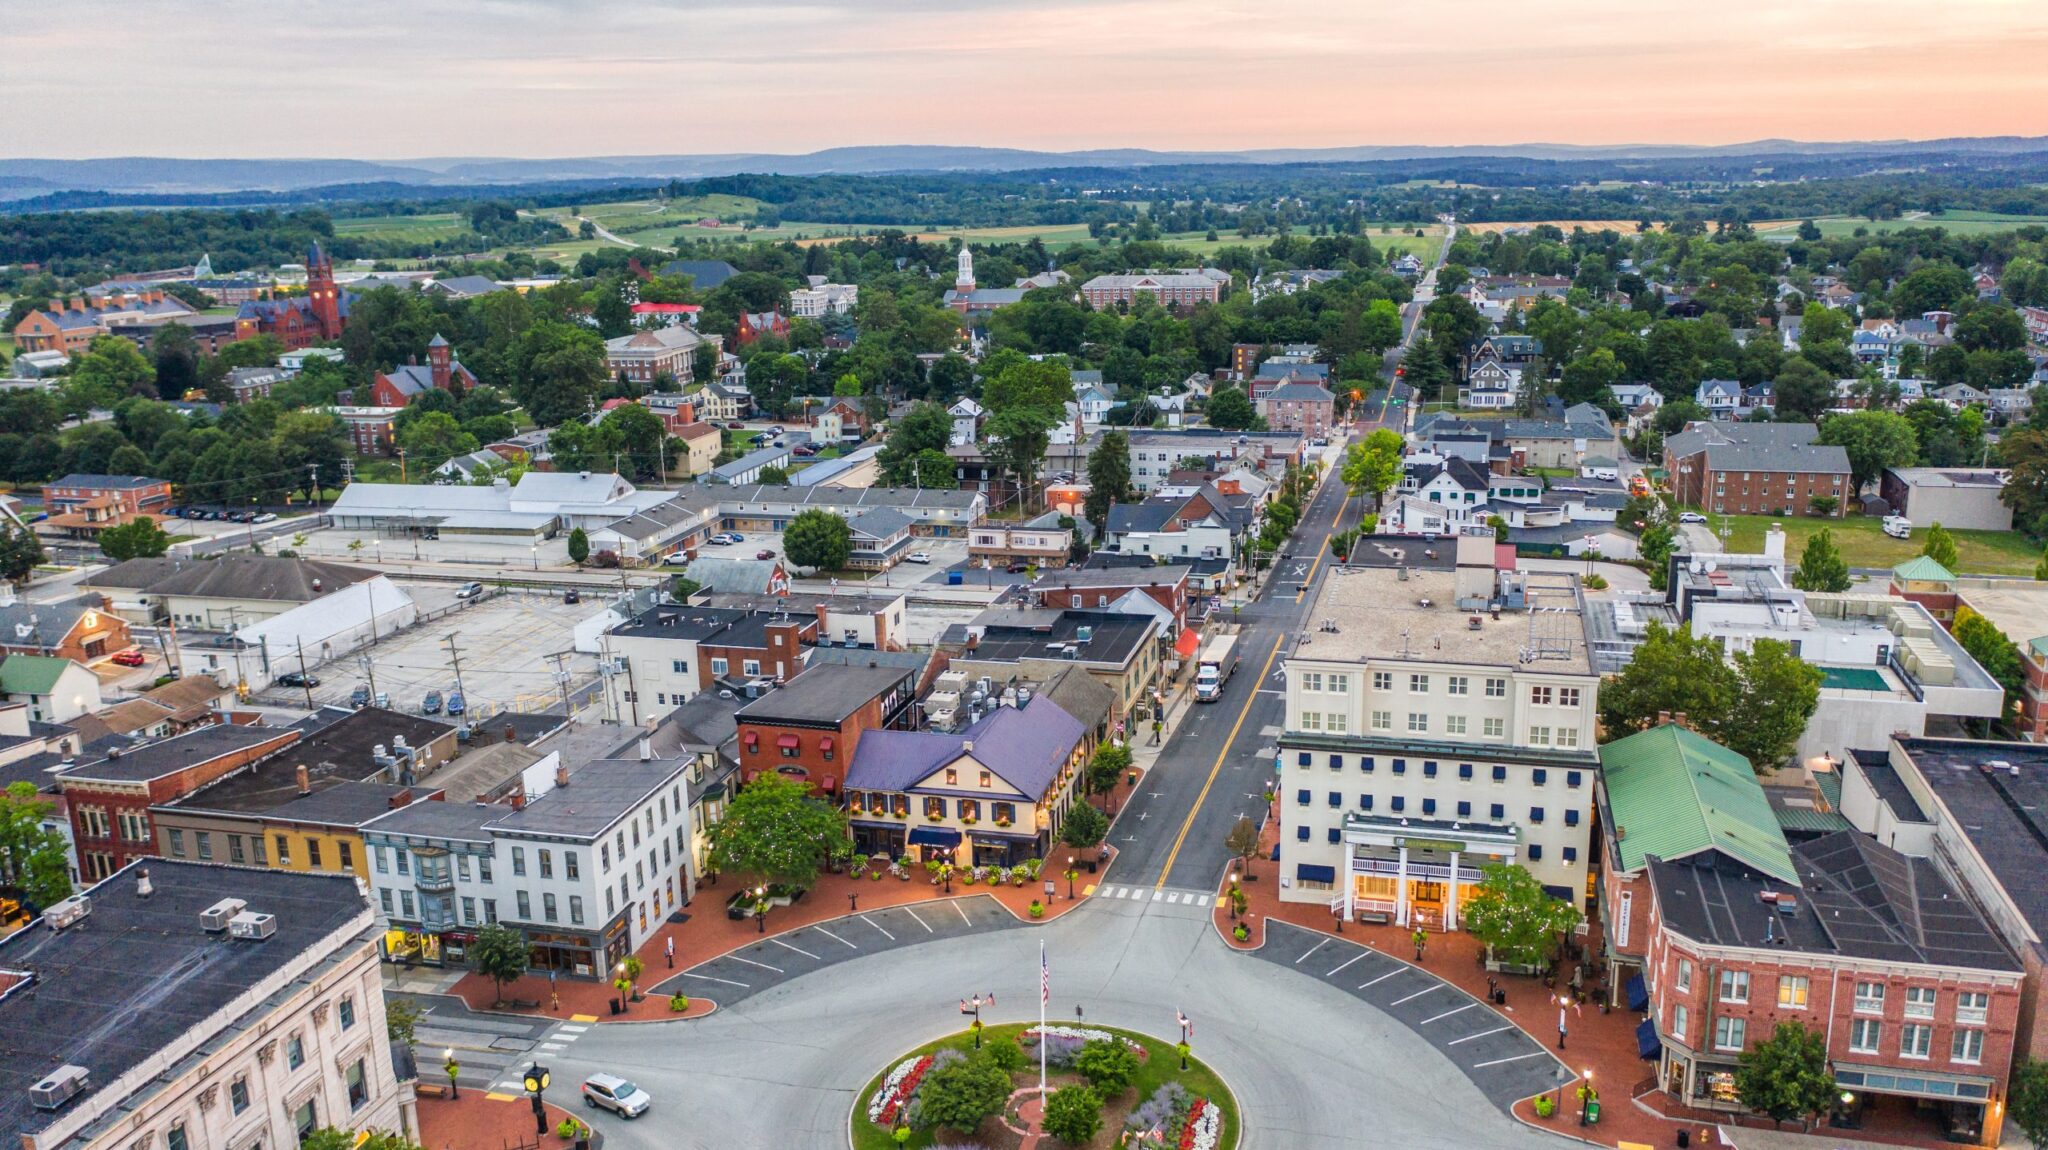 Gettysburg Hotel view from the drone